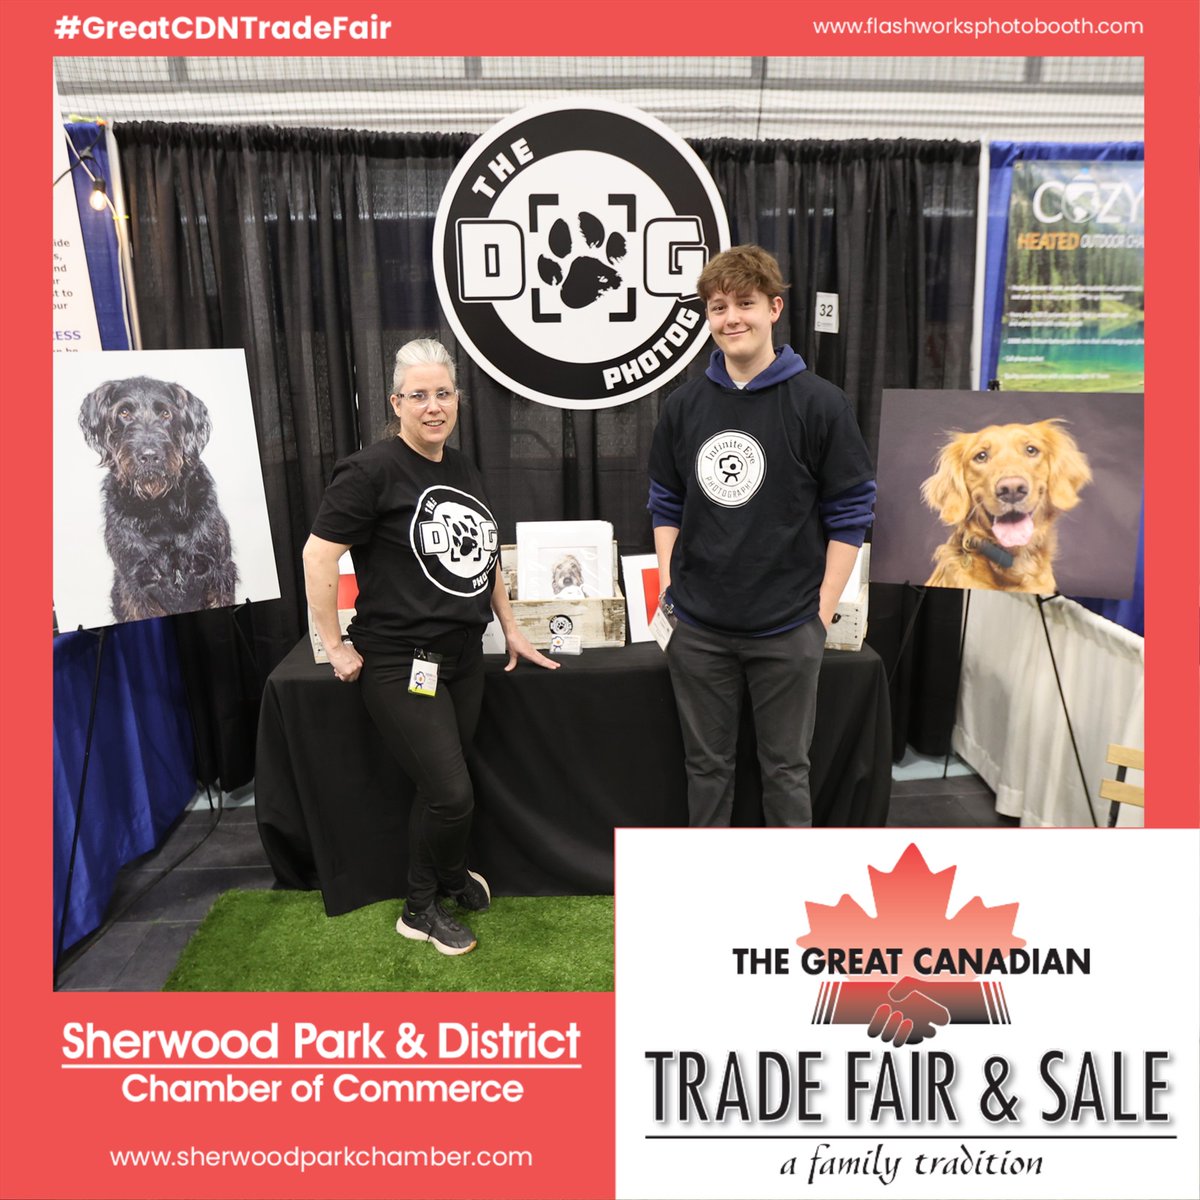 Visit the Great Canadian Trade Fair today at Millennium Place until 4 PM! #GreatCDNtradeFair #shpk #sherwoodpark #strathcona #Strathconacounty #strathco #tradefair